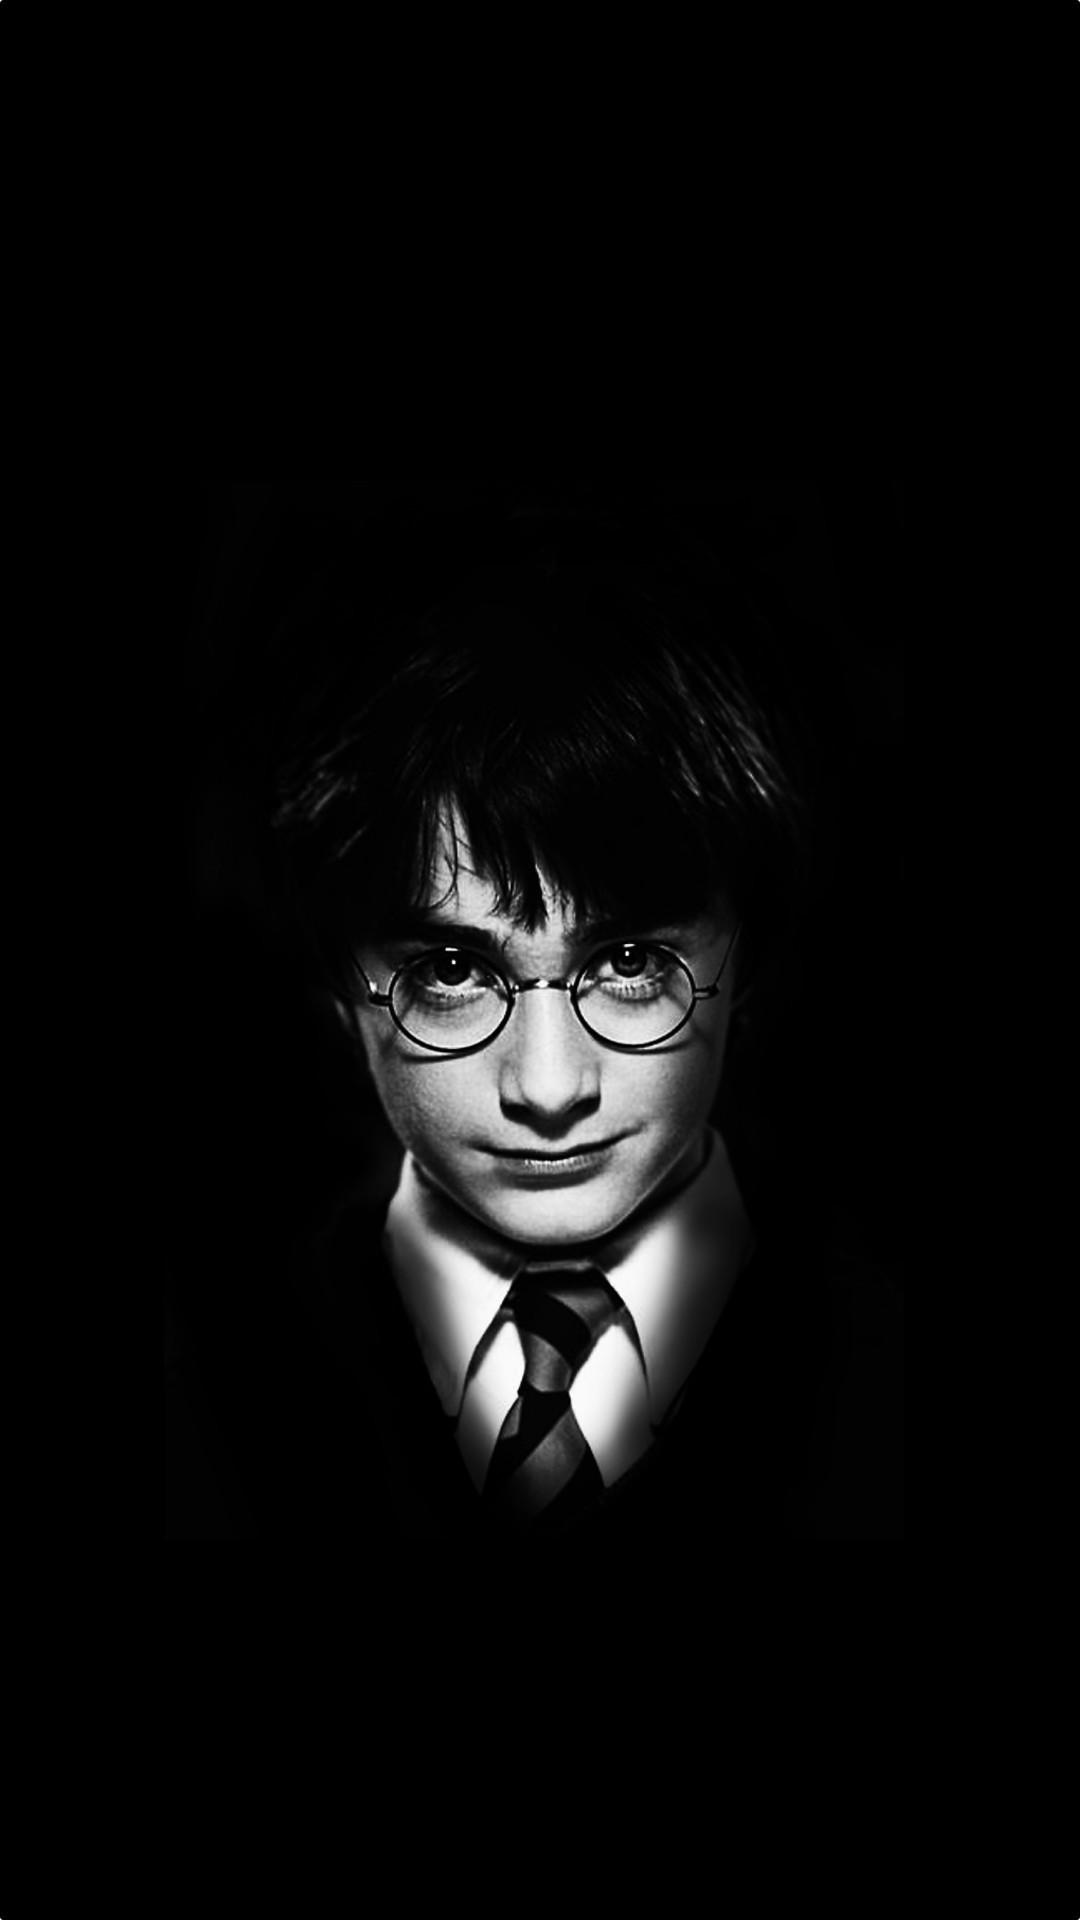 Mobile Harry Potter Wallpapers - Wallpaper Cave